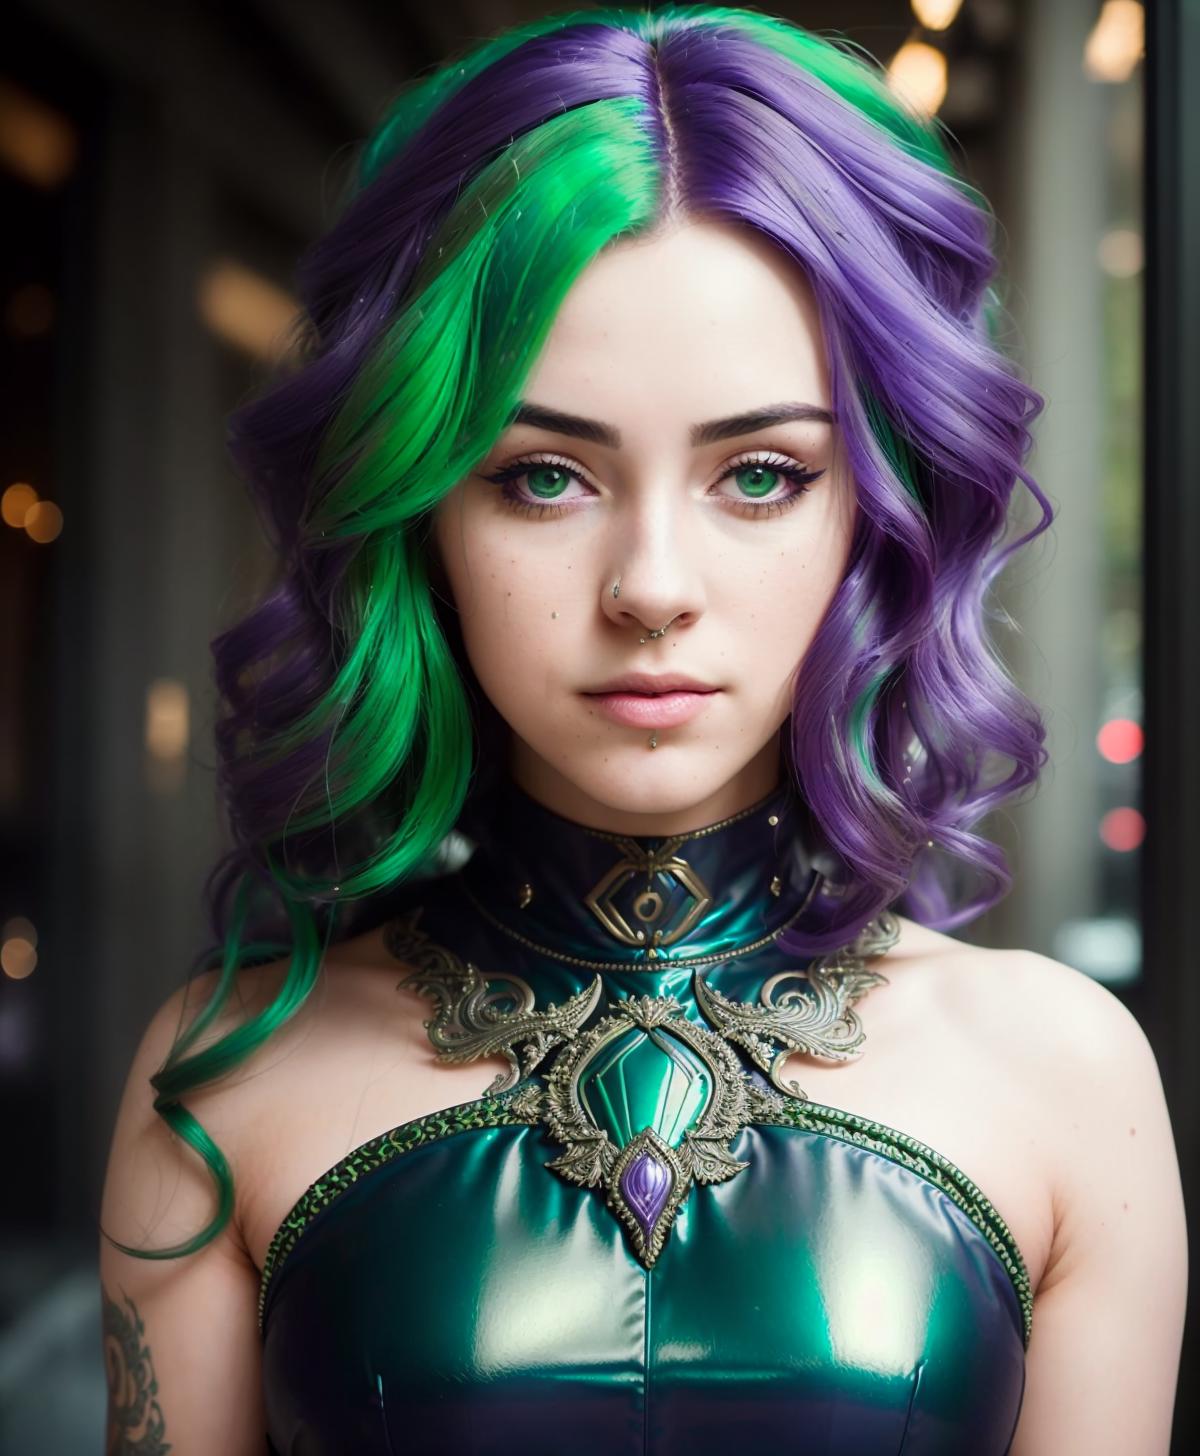 Half Color Hair image by mooncryptowow